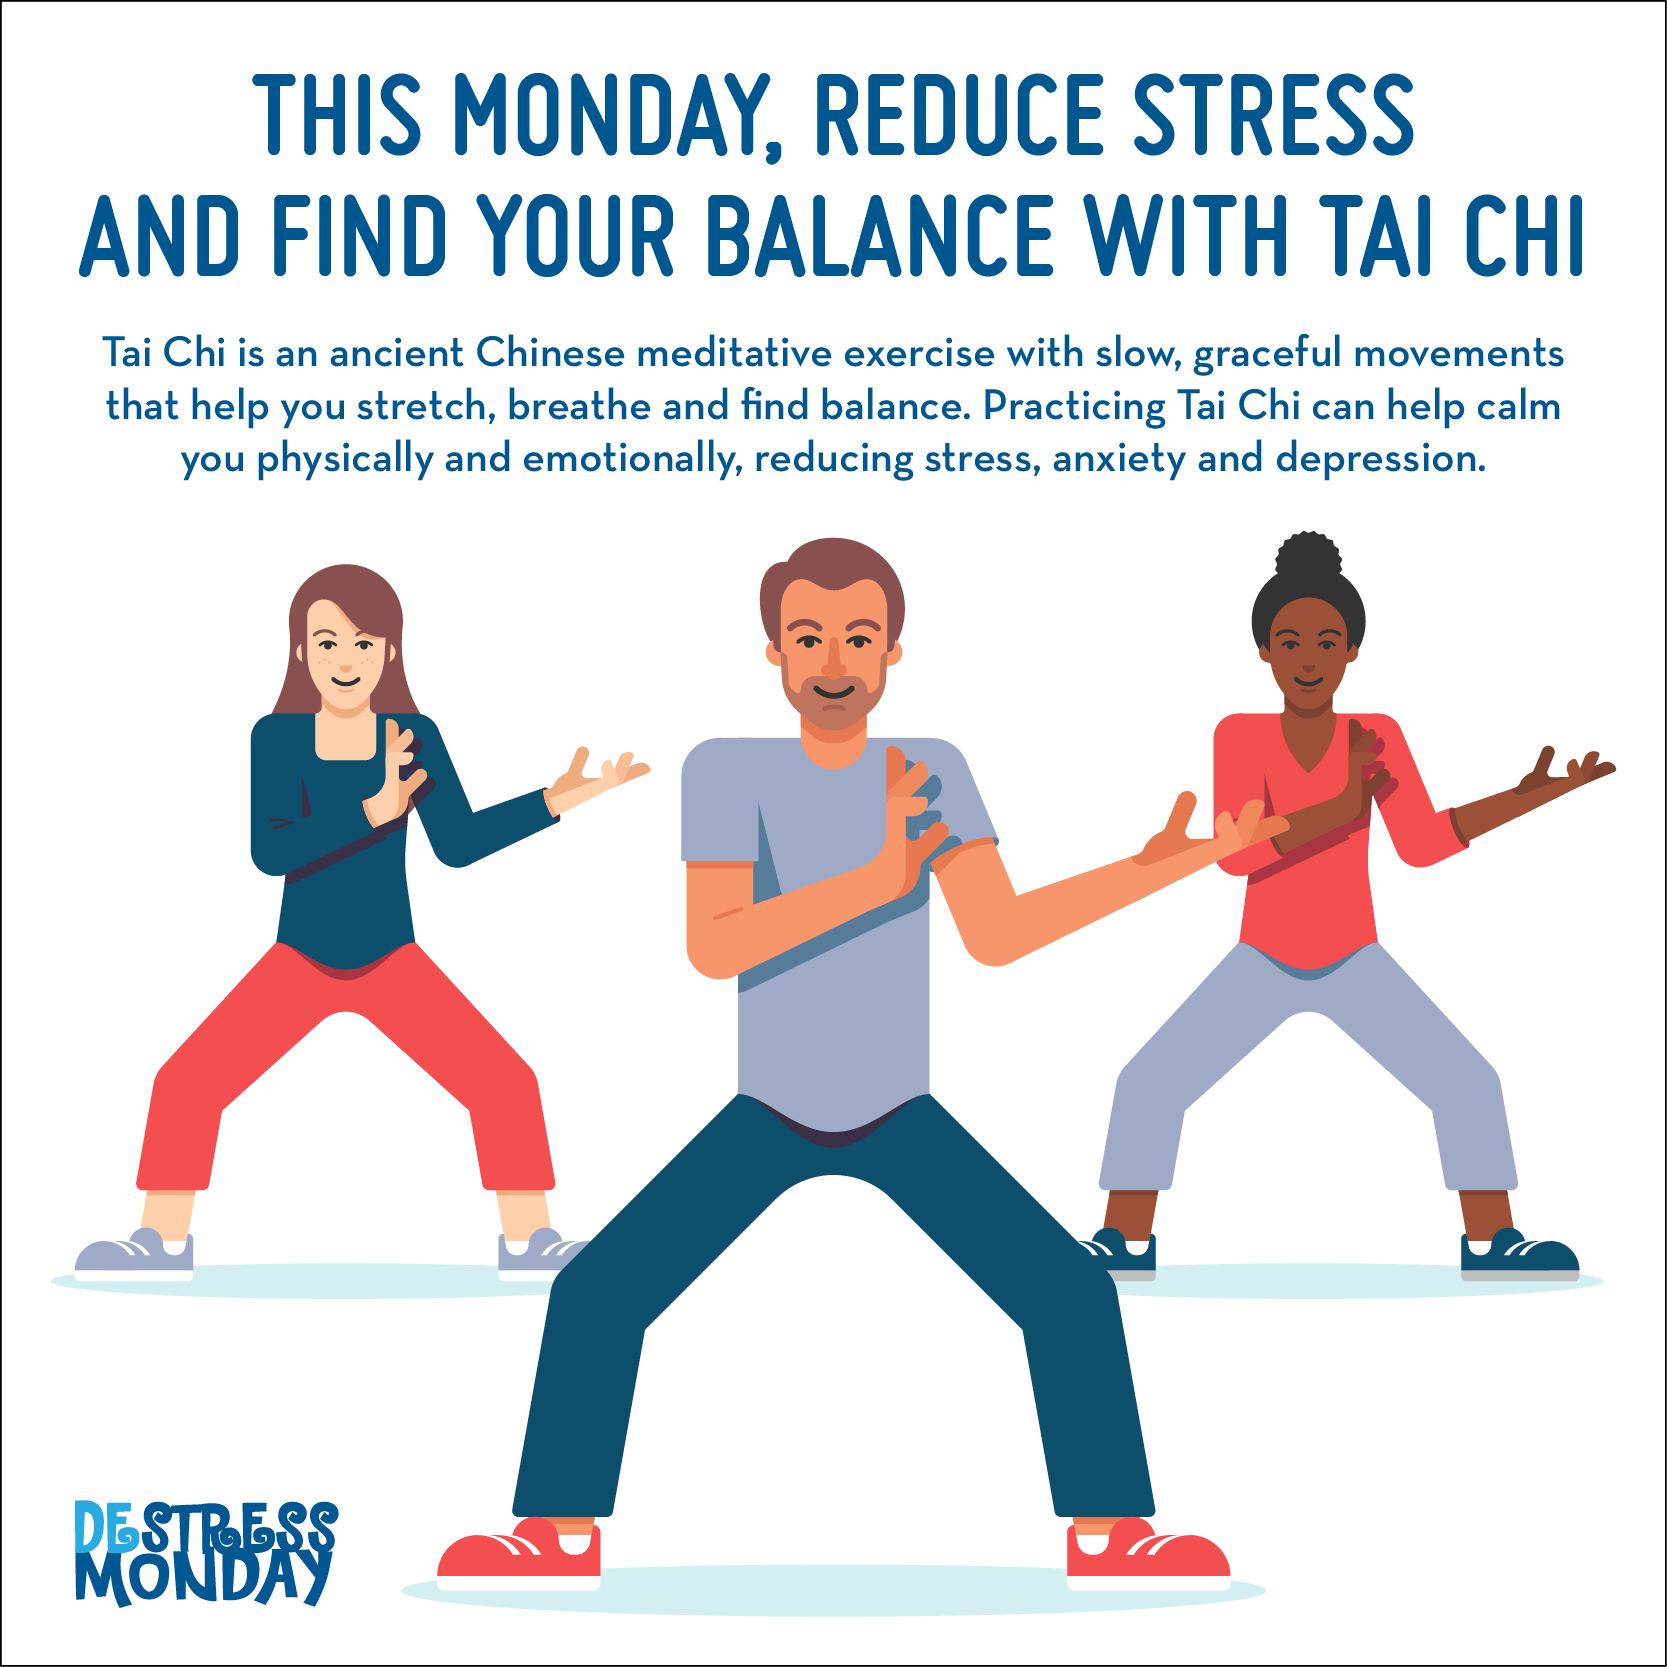 Why Tai Chi Is the Perfect Way to Reduce Stress This Monday